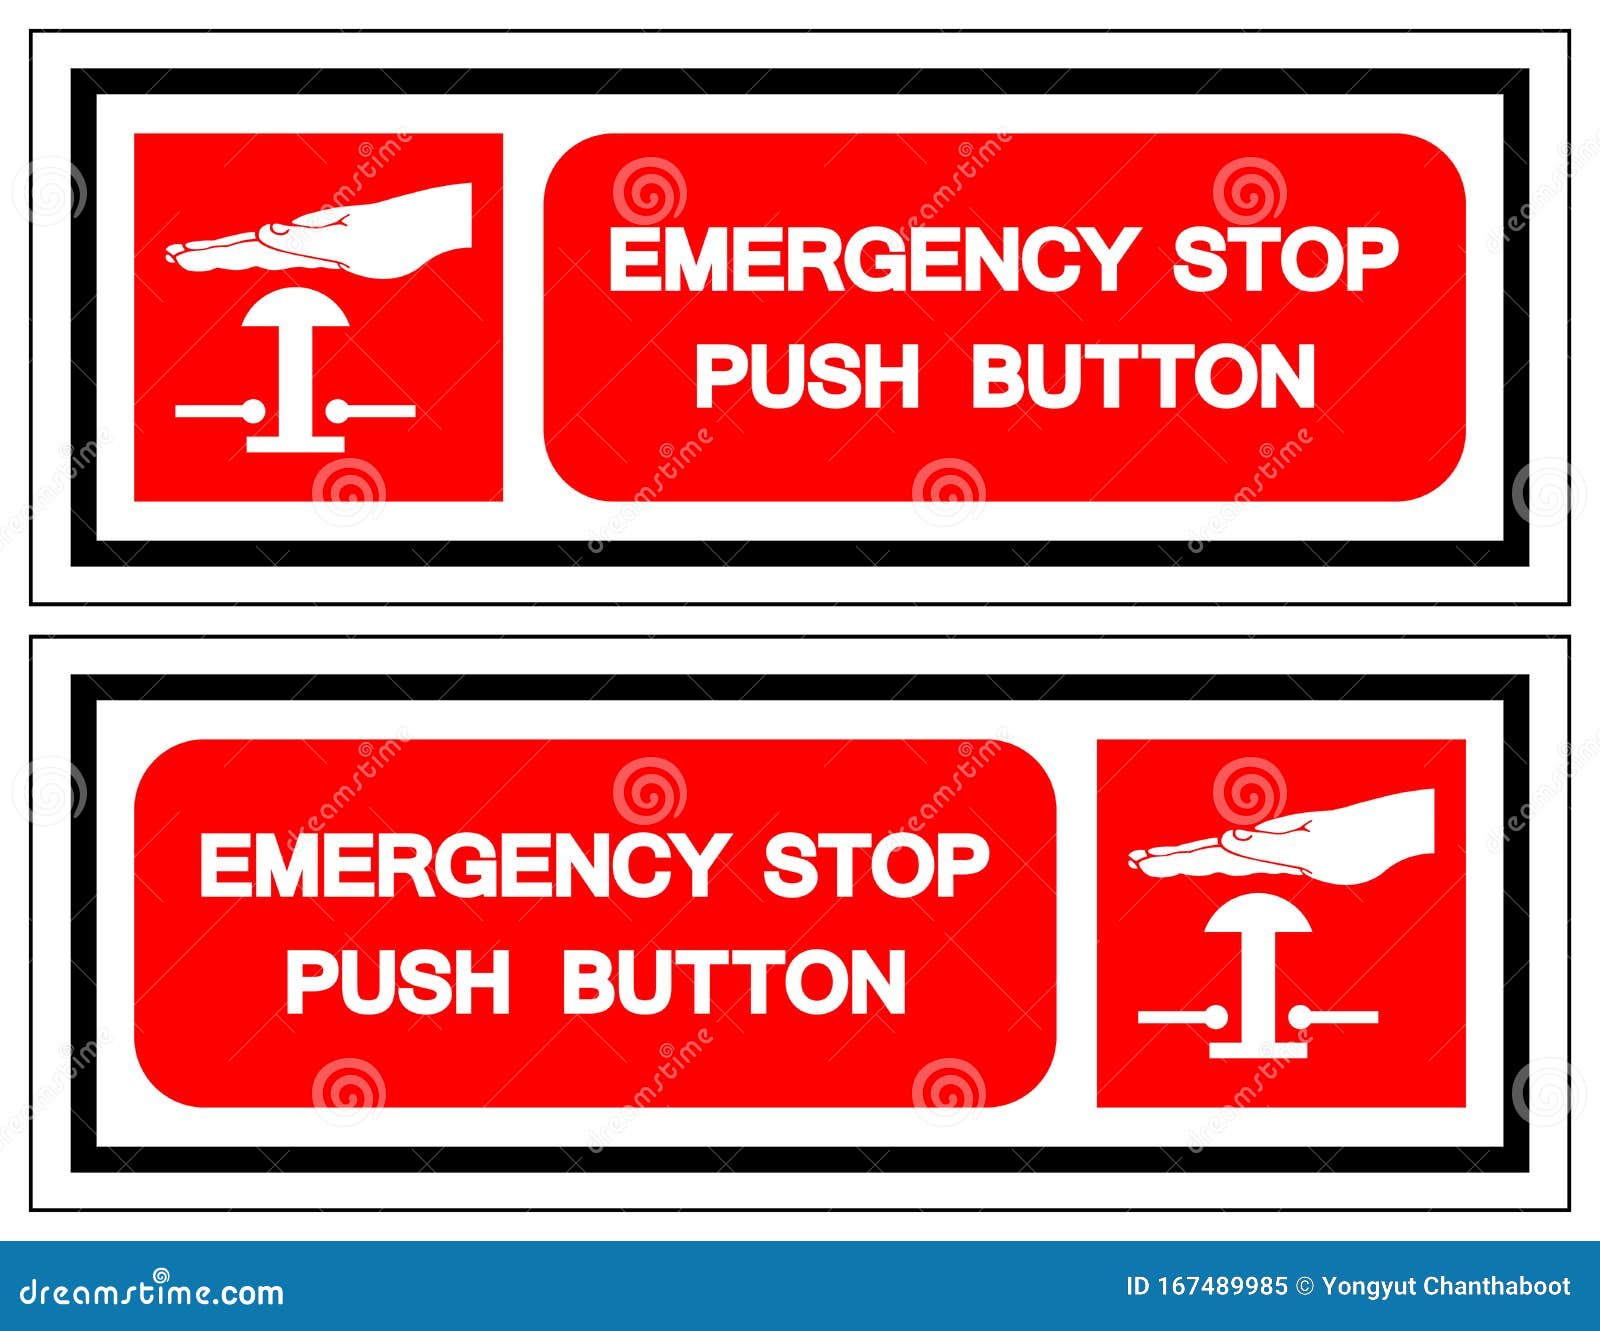 EMERGENCY STOP PUSH BUTTON STICKER SIGN 